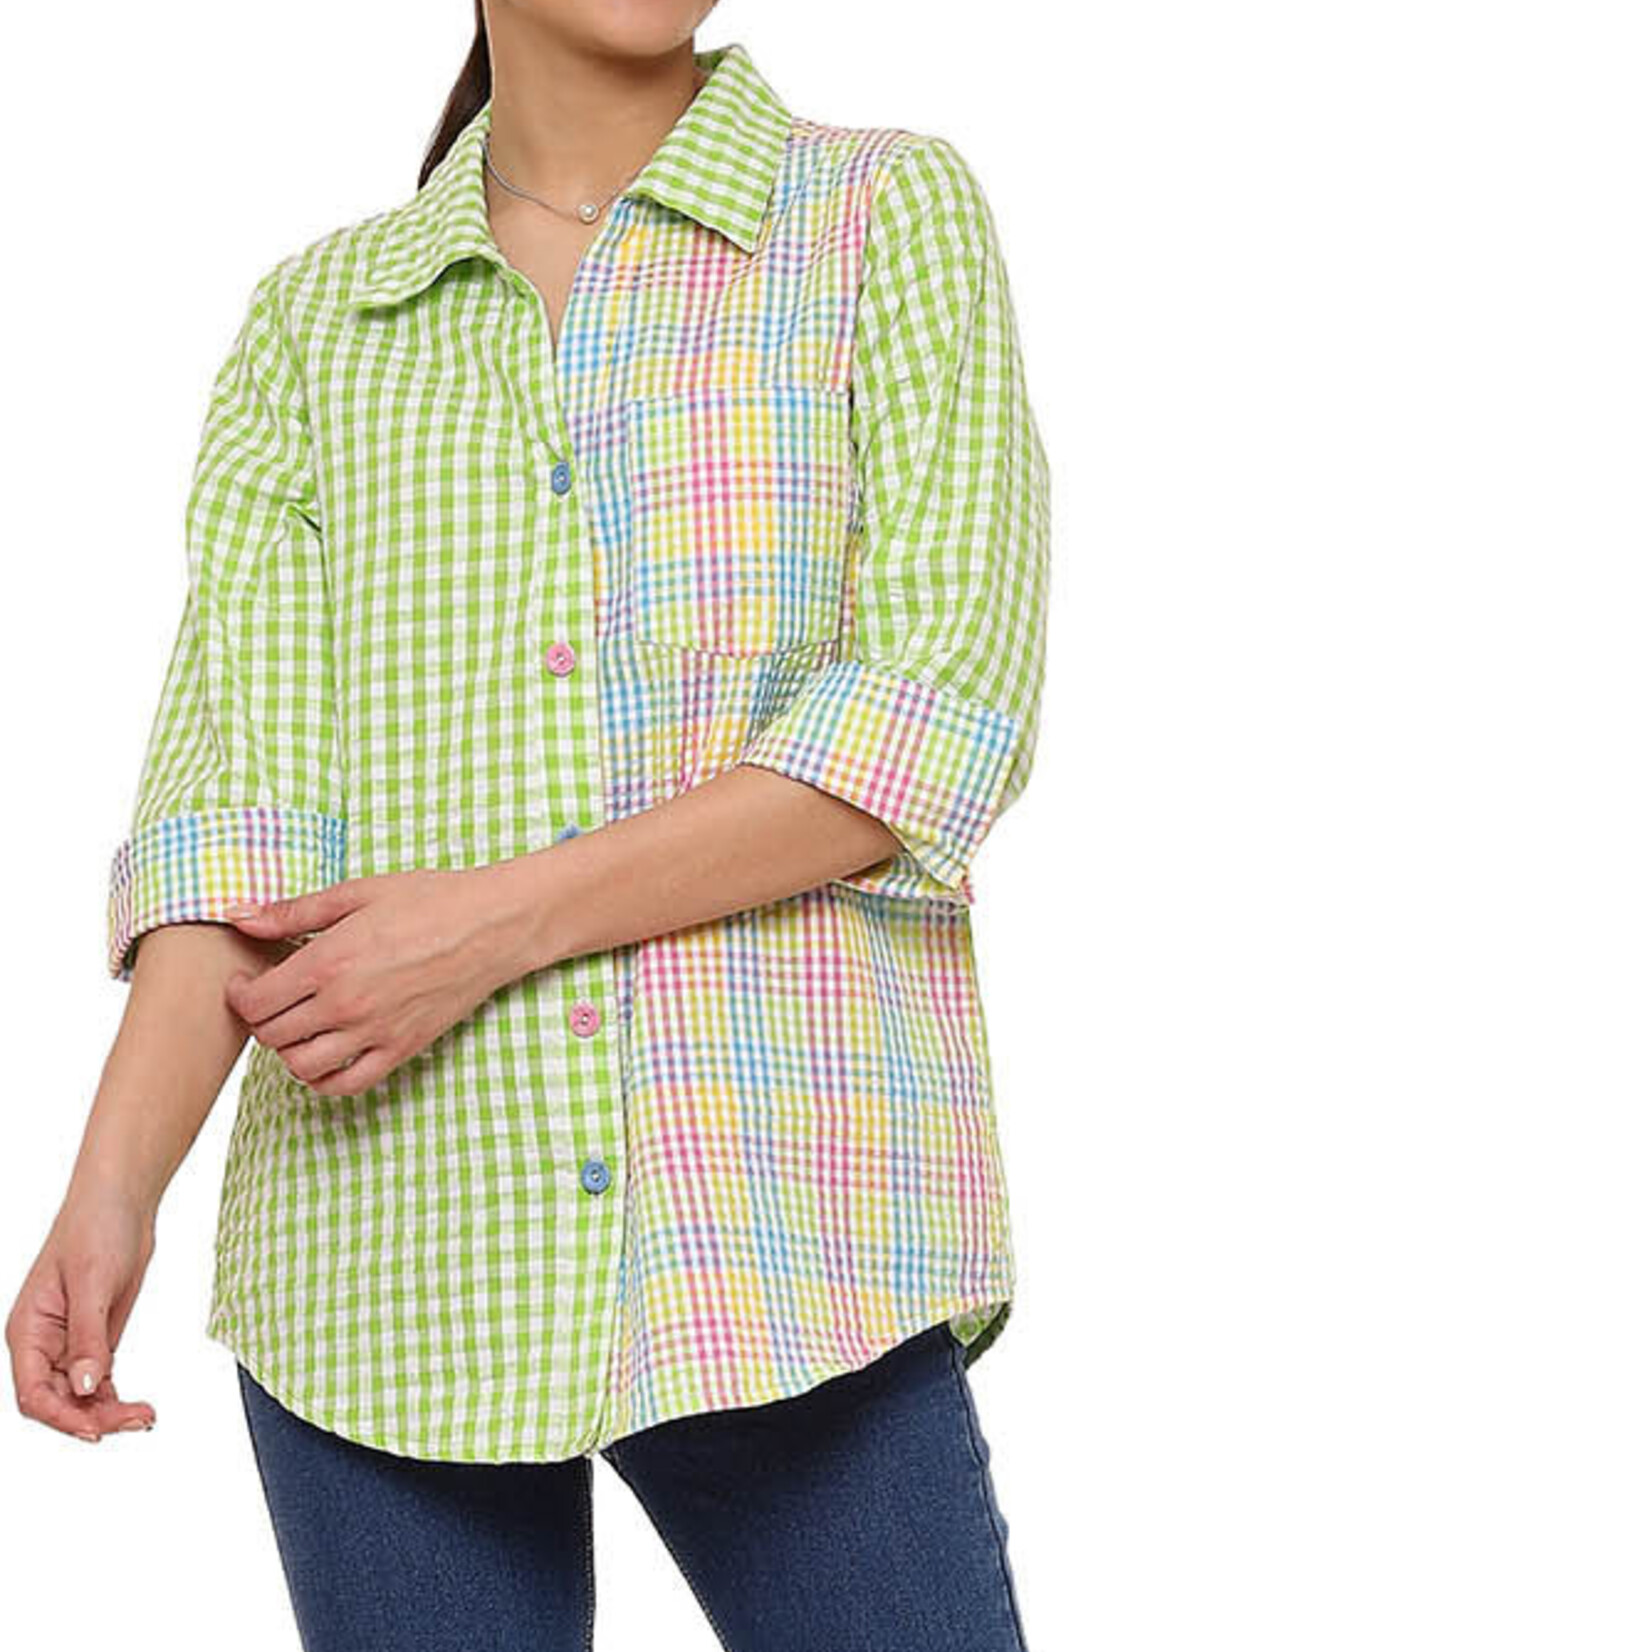 Parsley and Sage Green Gingham & Pastel Button Up Shirt